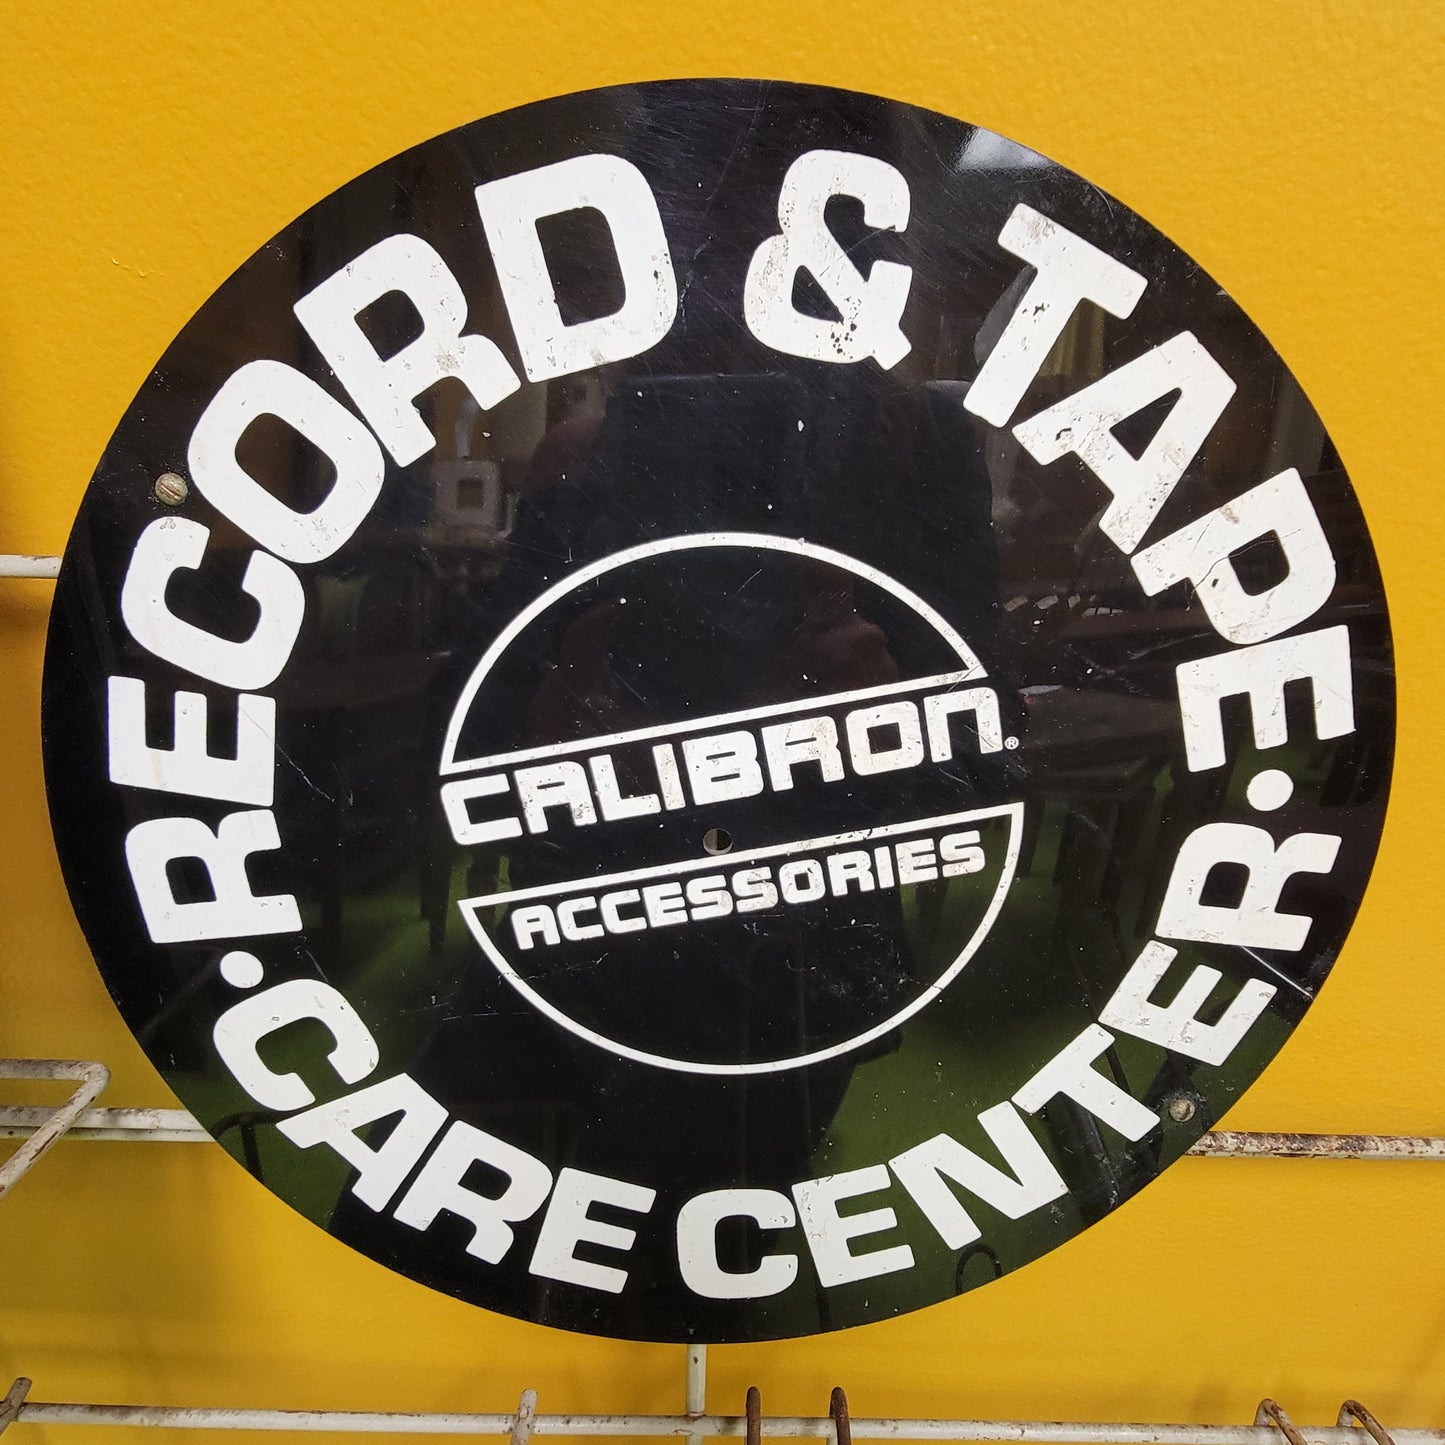 Vintage Calibron Record & Tapes Accessories Wall Hanging Metal Store Display Fixture